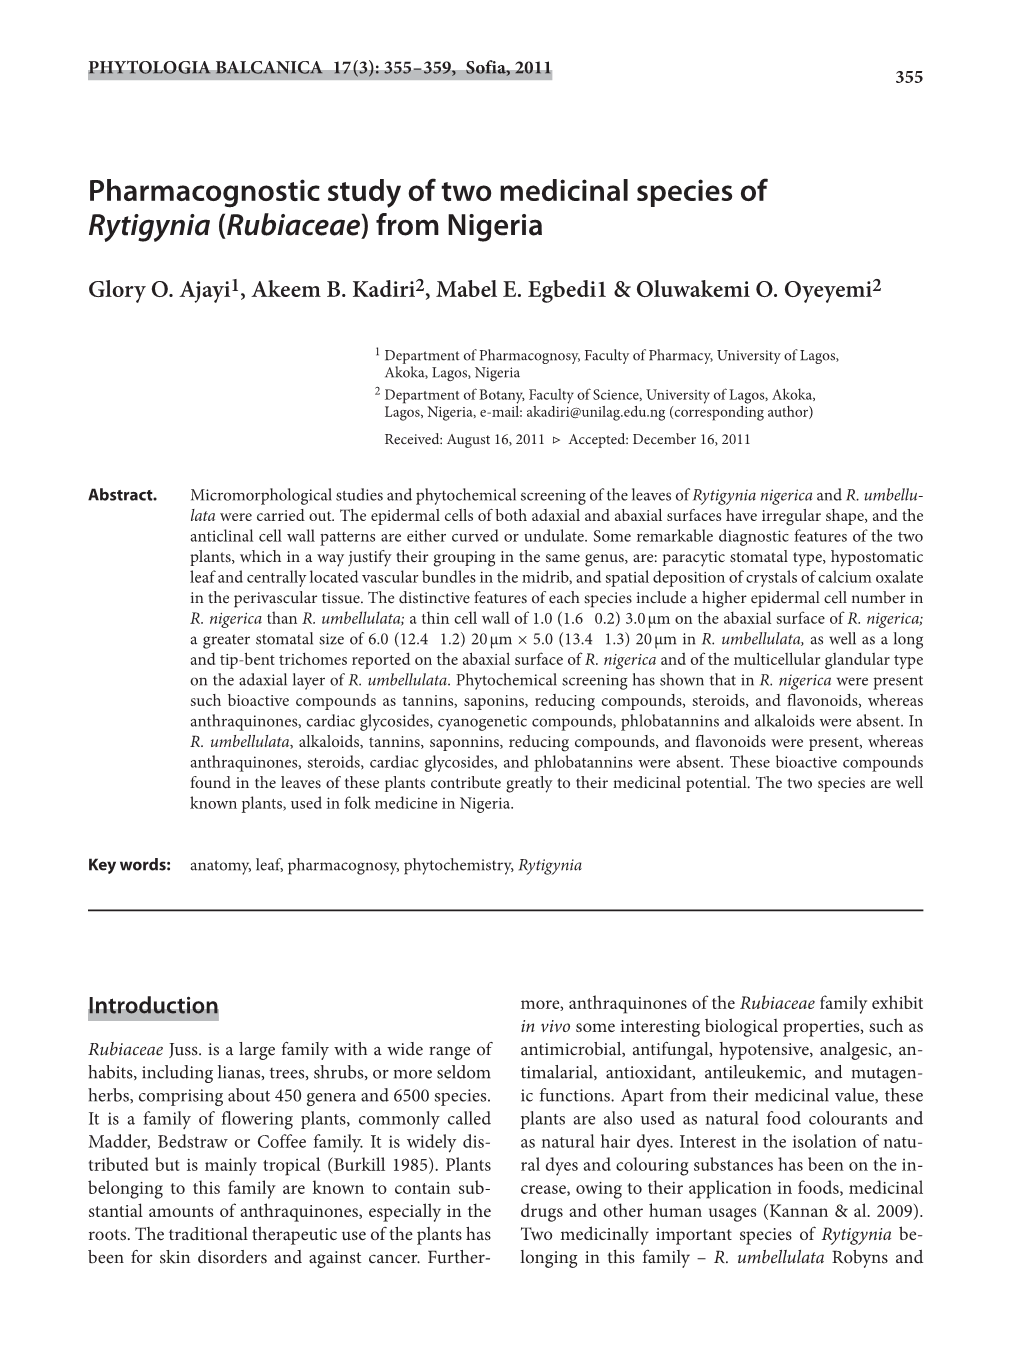 Pharmacognostic Study of Two Medicinal Species of Rytigynia (Rubiaceae) from Nigeria